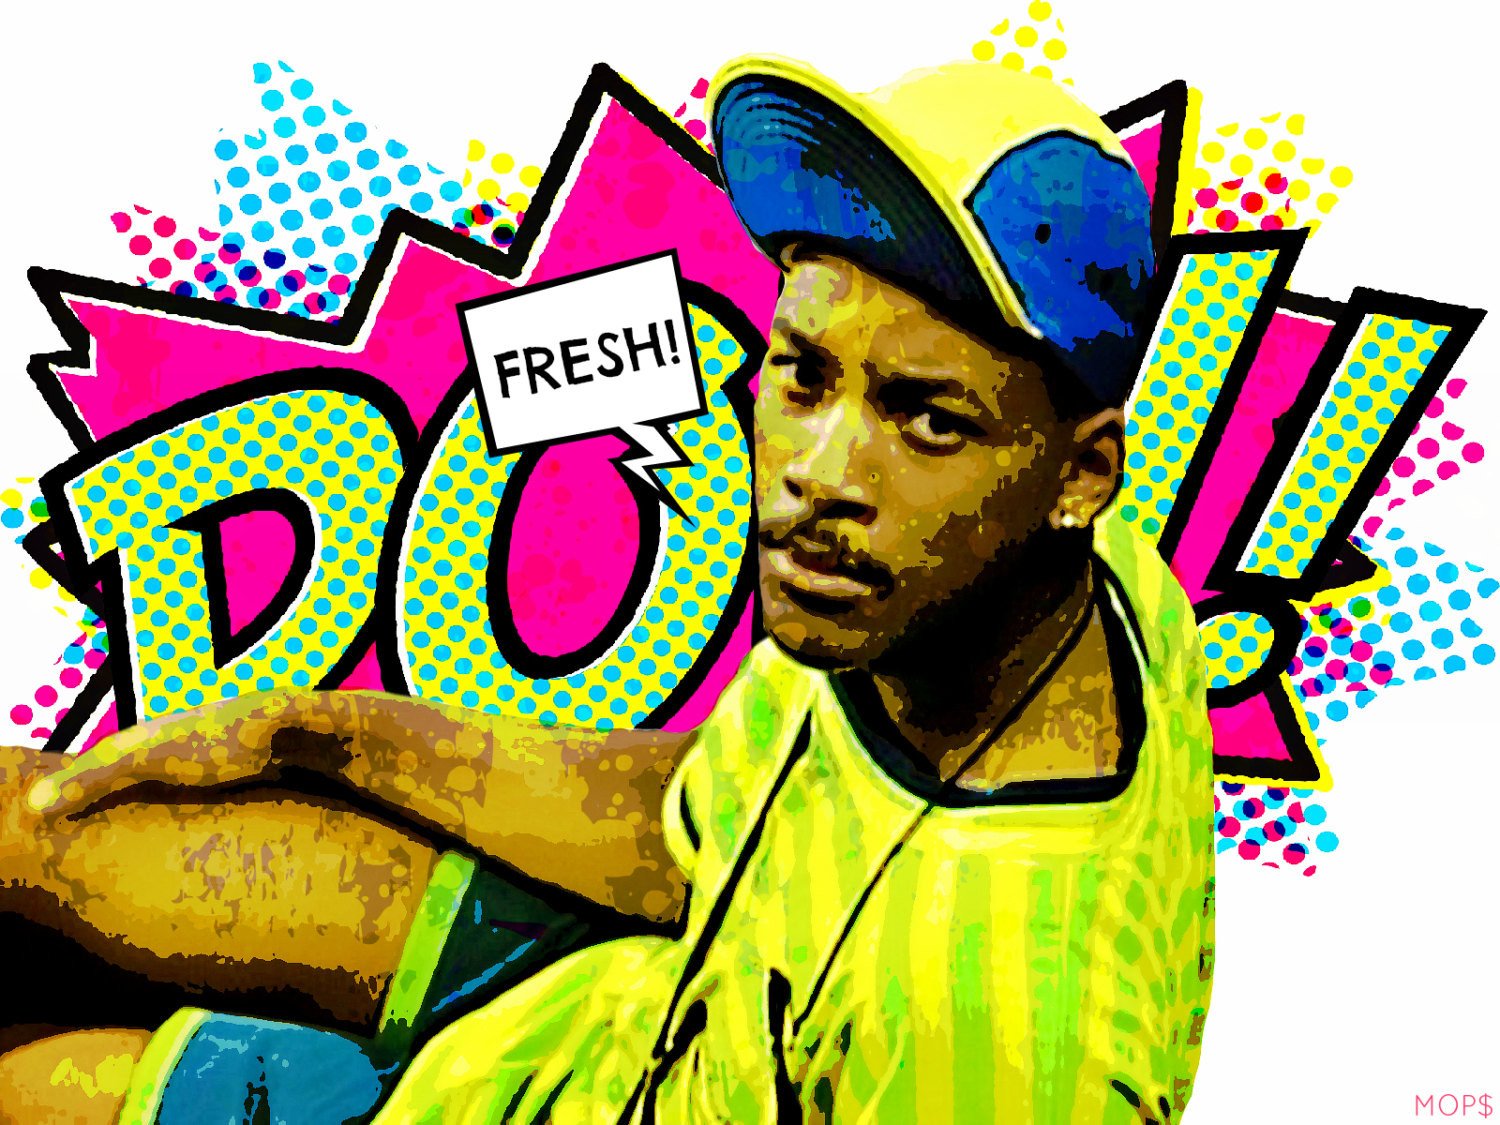 Prince Of Bel Air
 Fresh Prince of Bel Air rap song from the sit